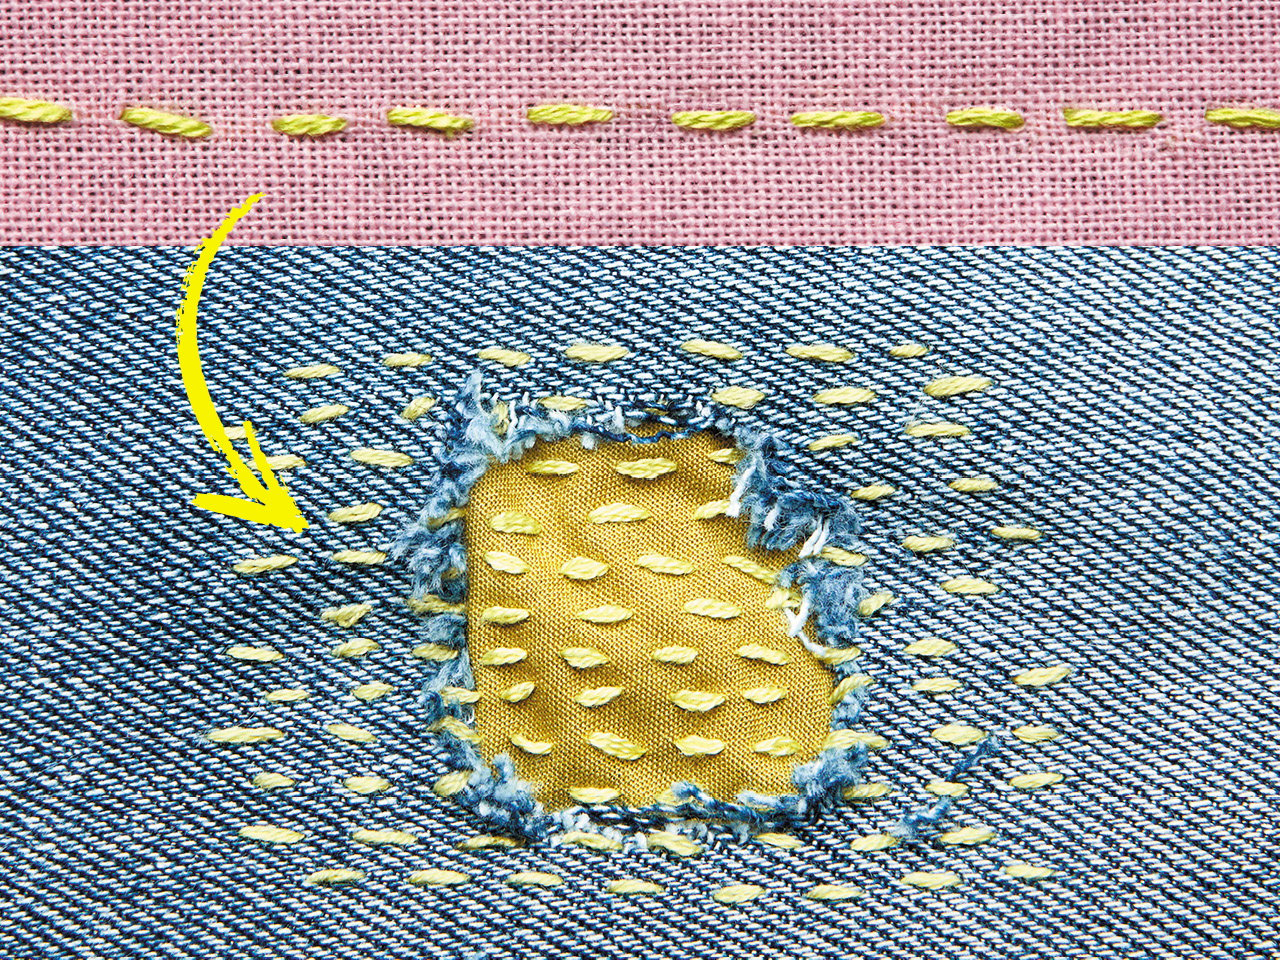 A demonstration of the running stitch in yellow thread on denim and yellow fabric